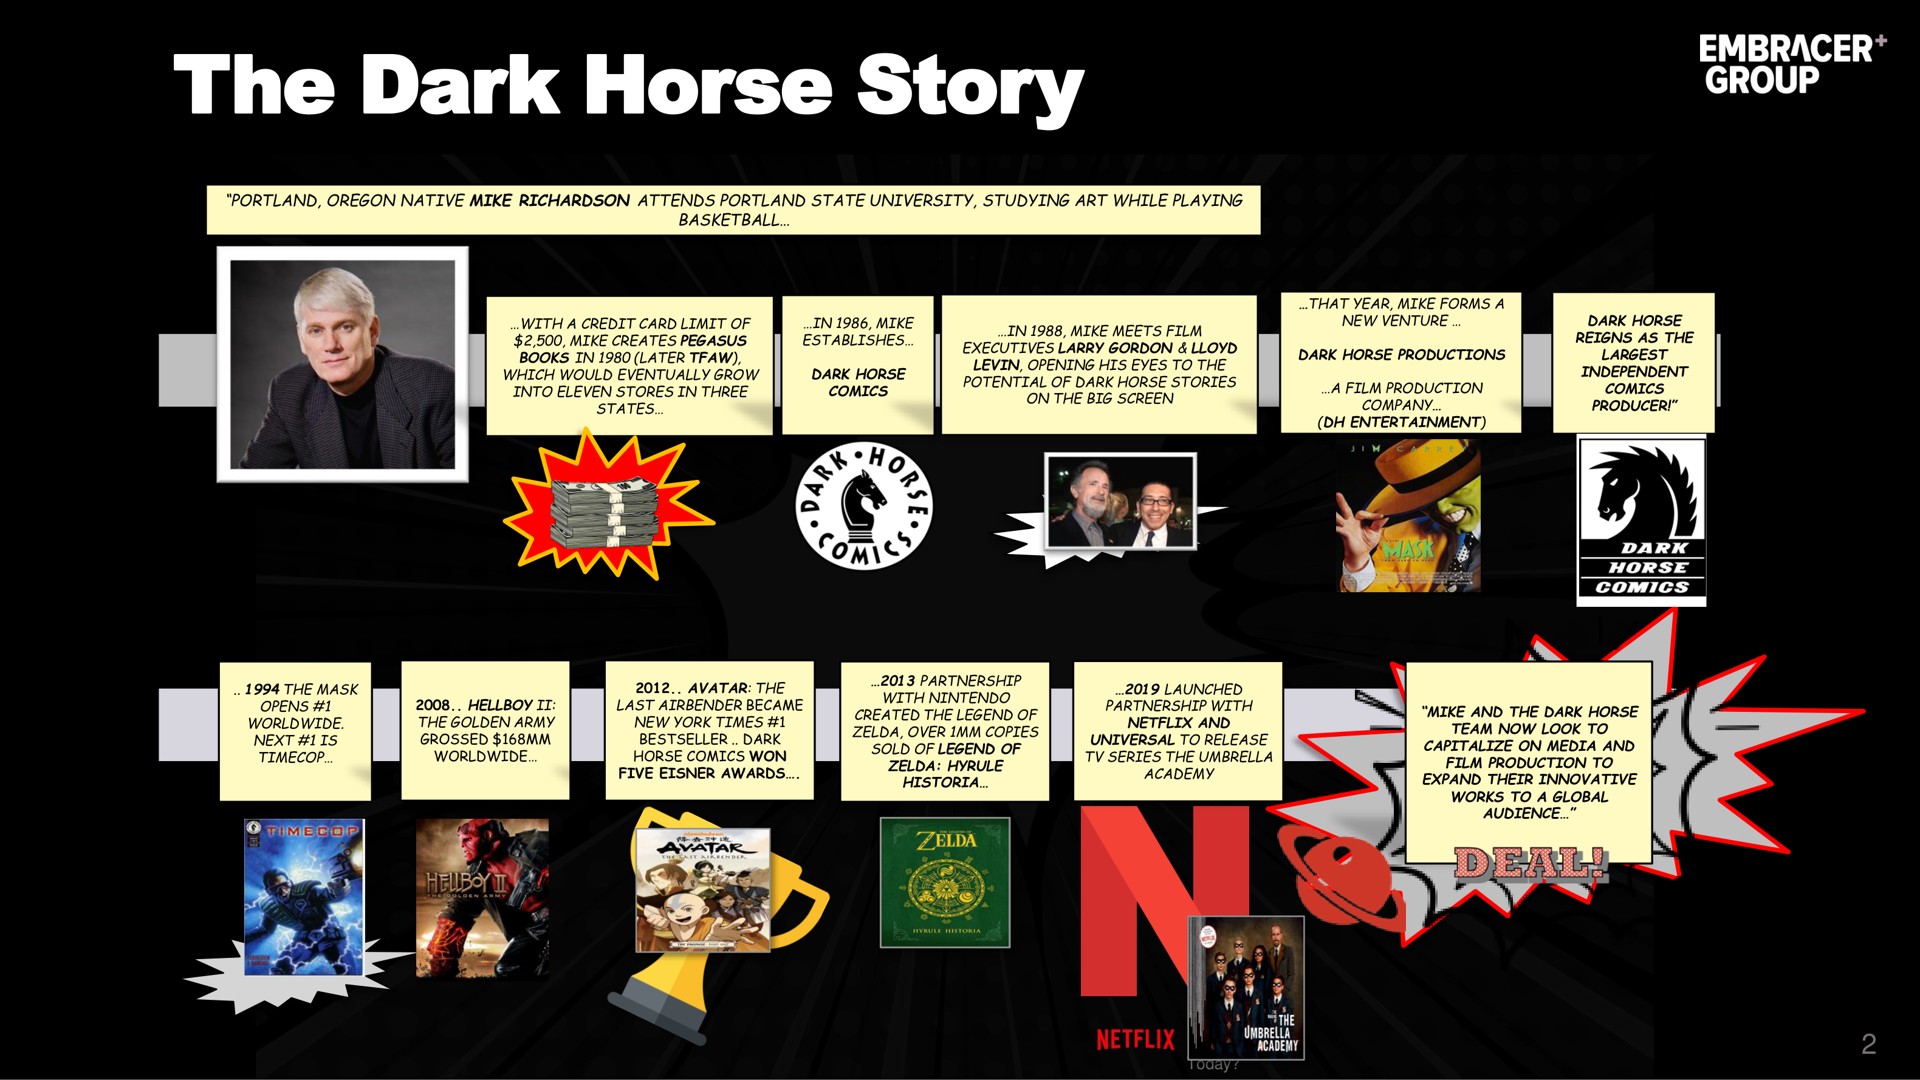 the dark horse story | Embracer Group